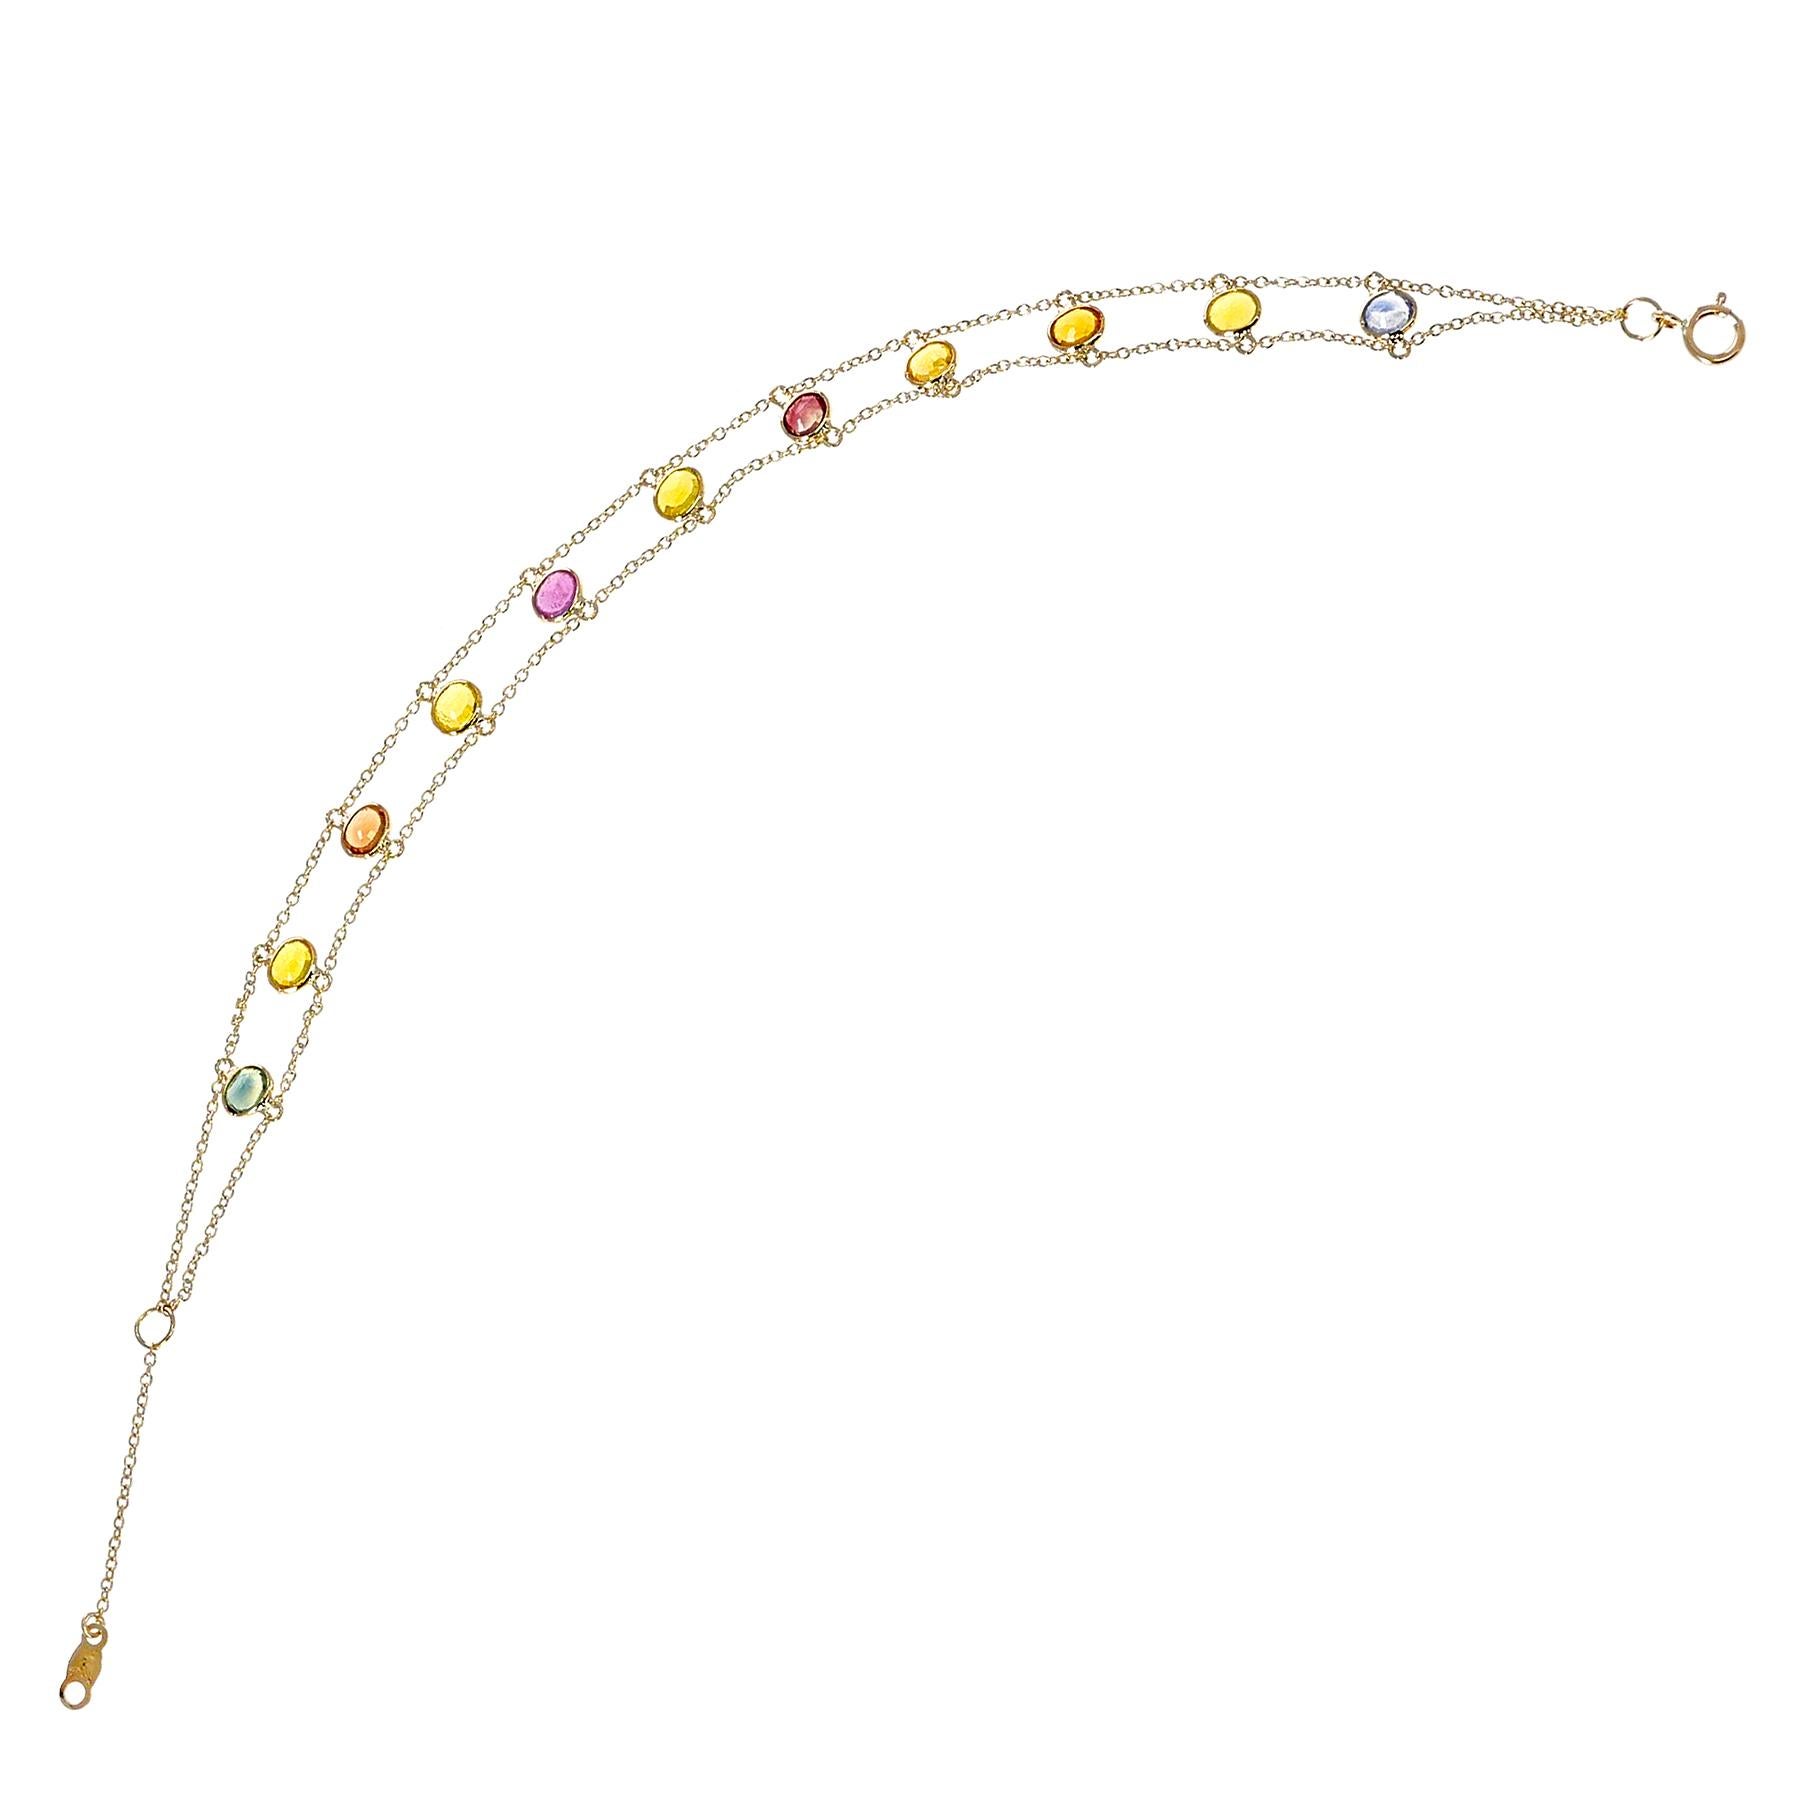 A 3 x 4MM Oval Genuine Multi-Sapphire 18k Yellow Gold Adjustable Bracelet. The length of the bracelet is 7.50.